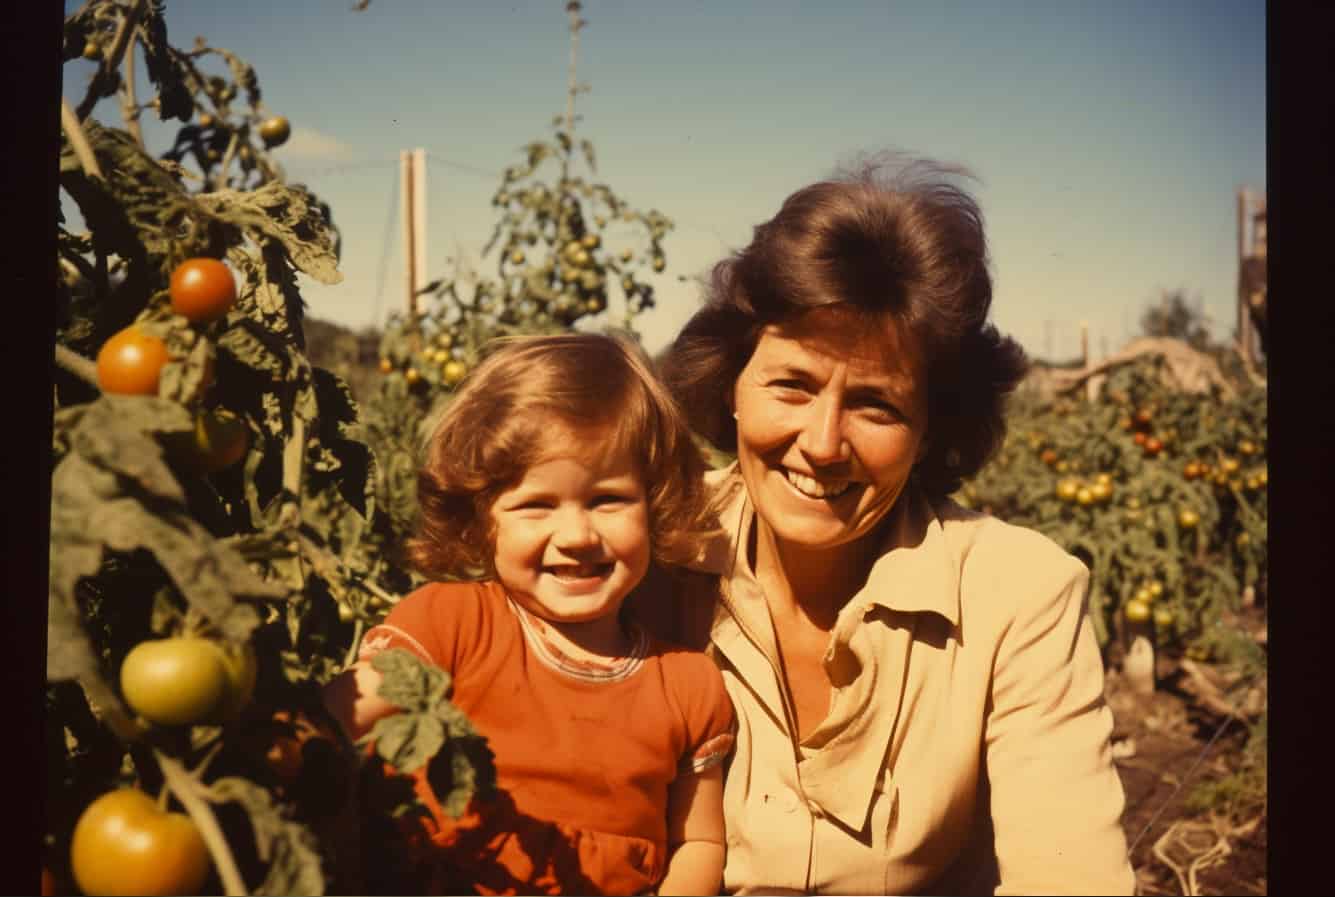 A woman and a young girl, both expressing their love for gardening, standing in a lush tomato plant.